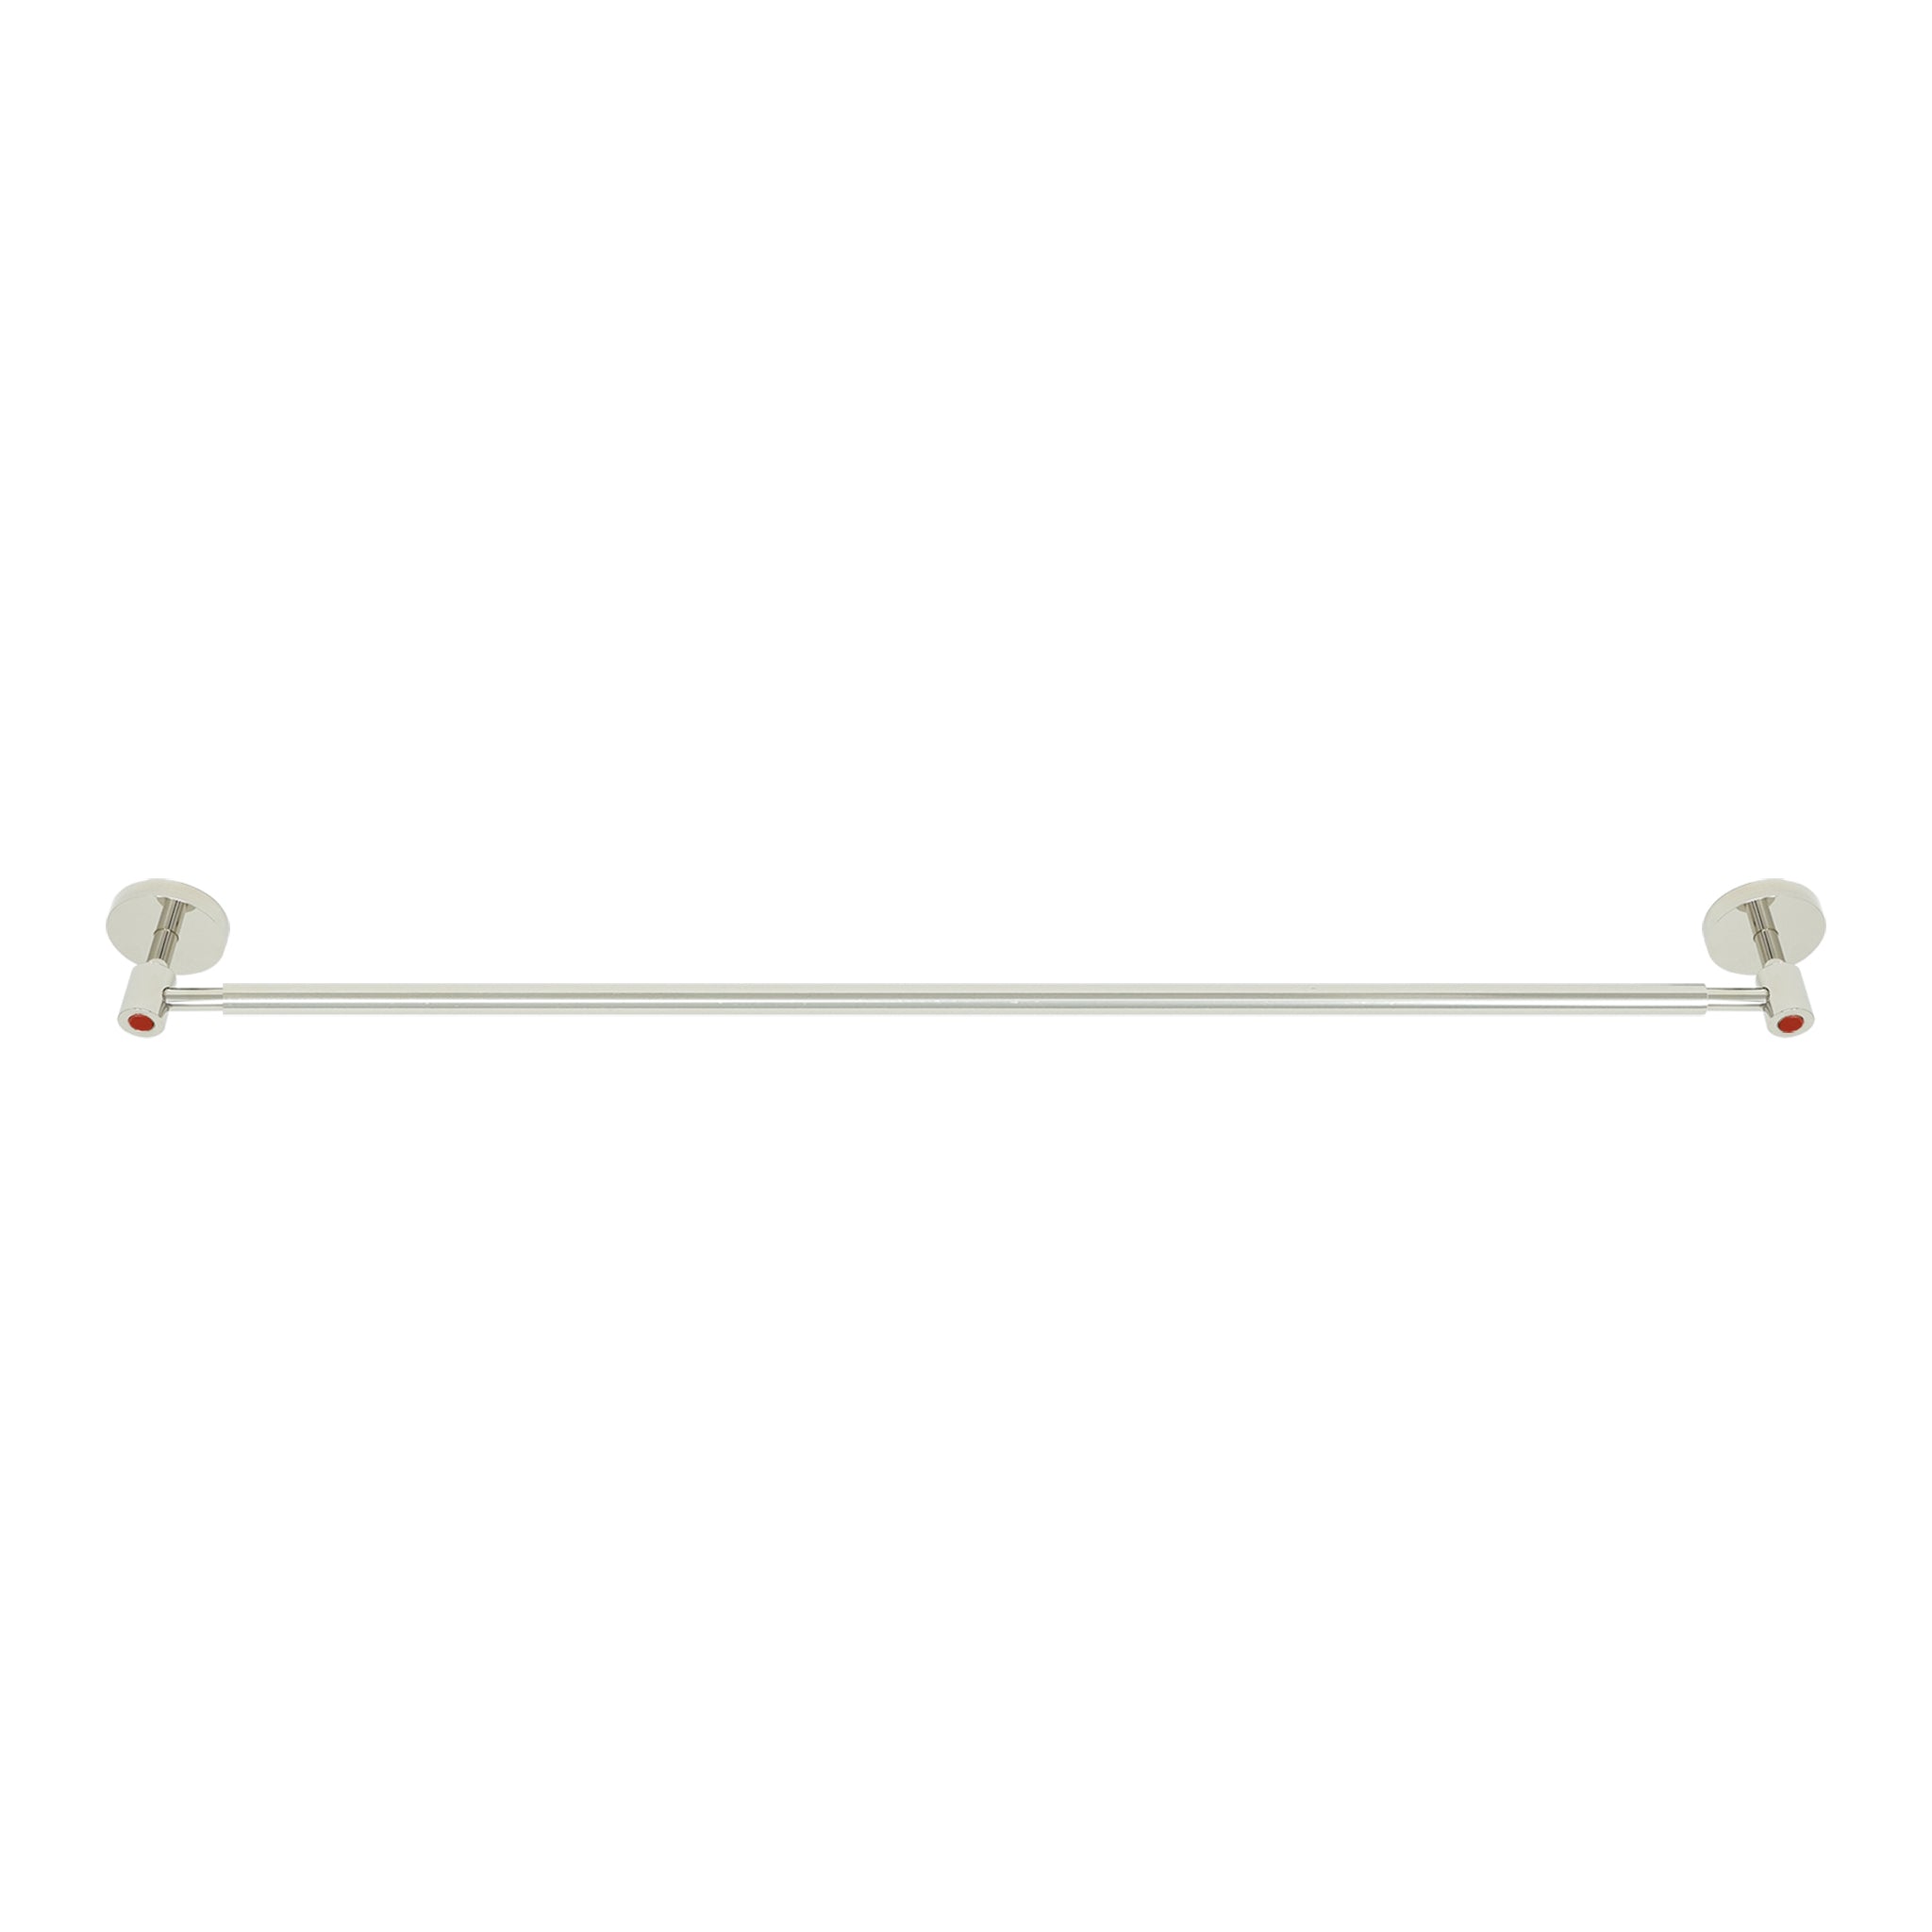 Nickel and riding hood red color Head towel bar 24" Dutton Brown hardware